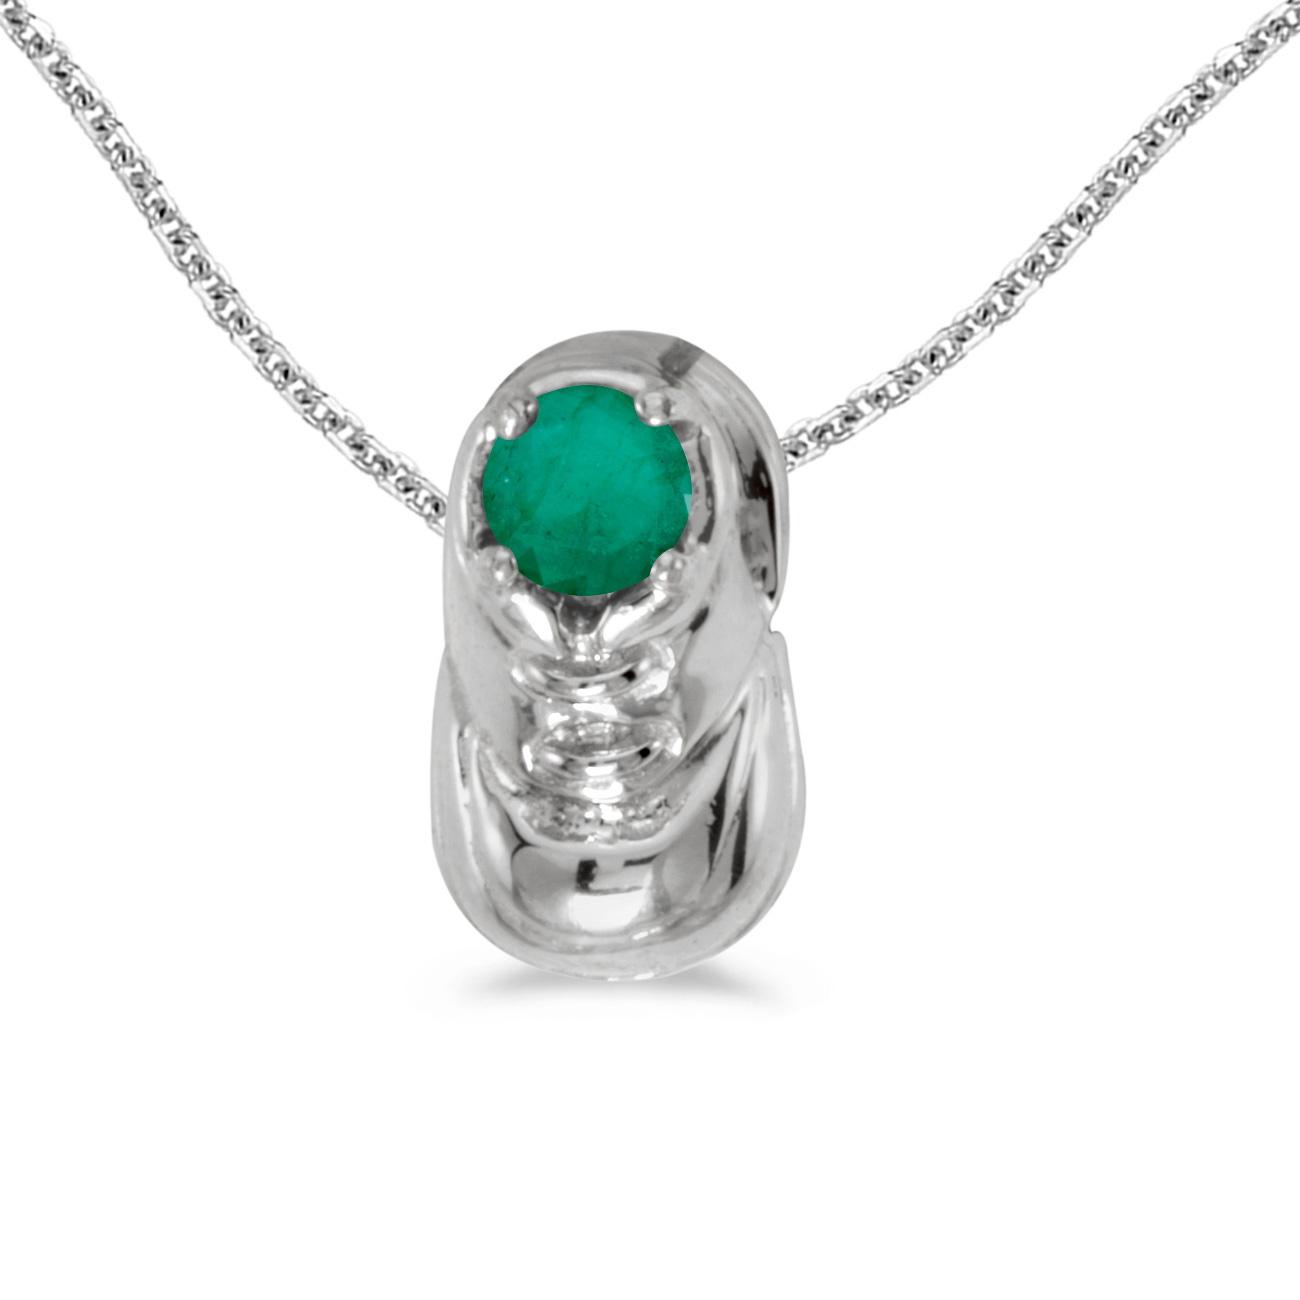 DIRECT-JEWELRY DON'T FORGET THE DASH 14k White Gold Round Emerald Baby Bootie Pendant with 18" Chain